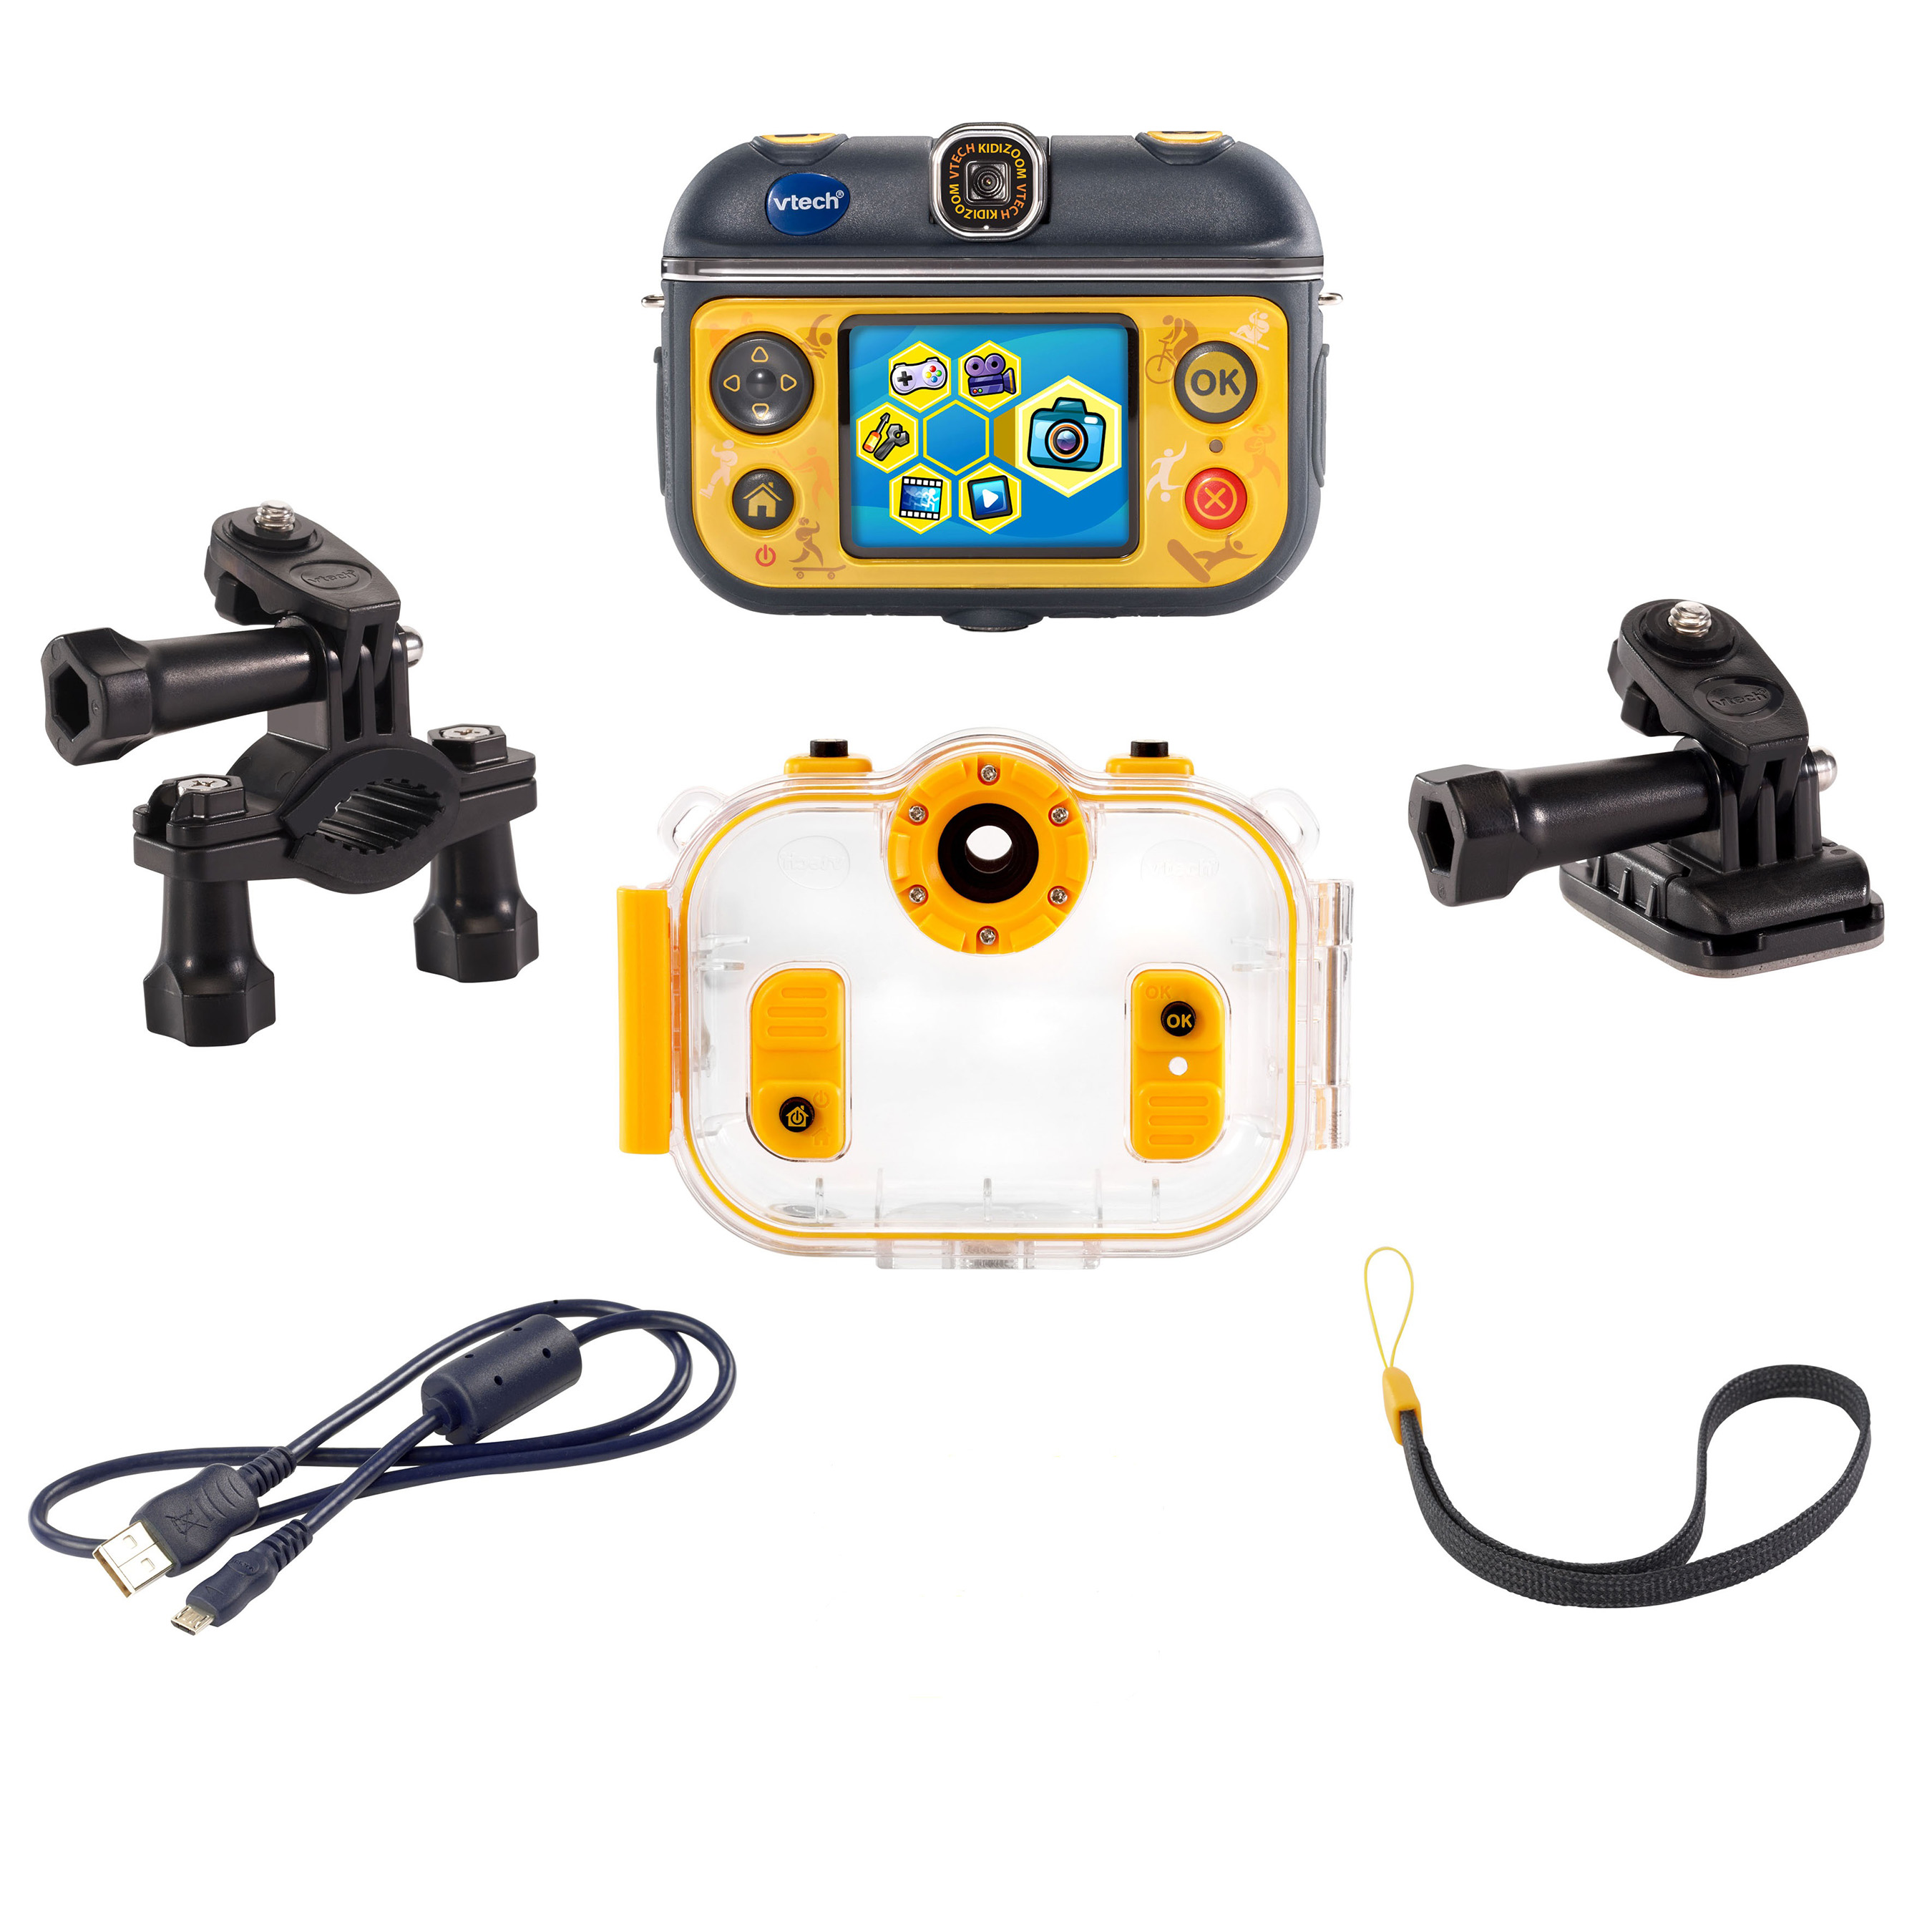 Kidizoom® Action Cam 180 (included accessories)